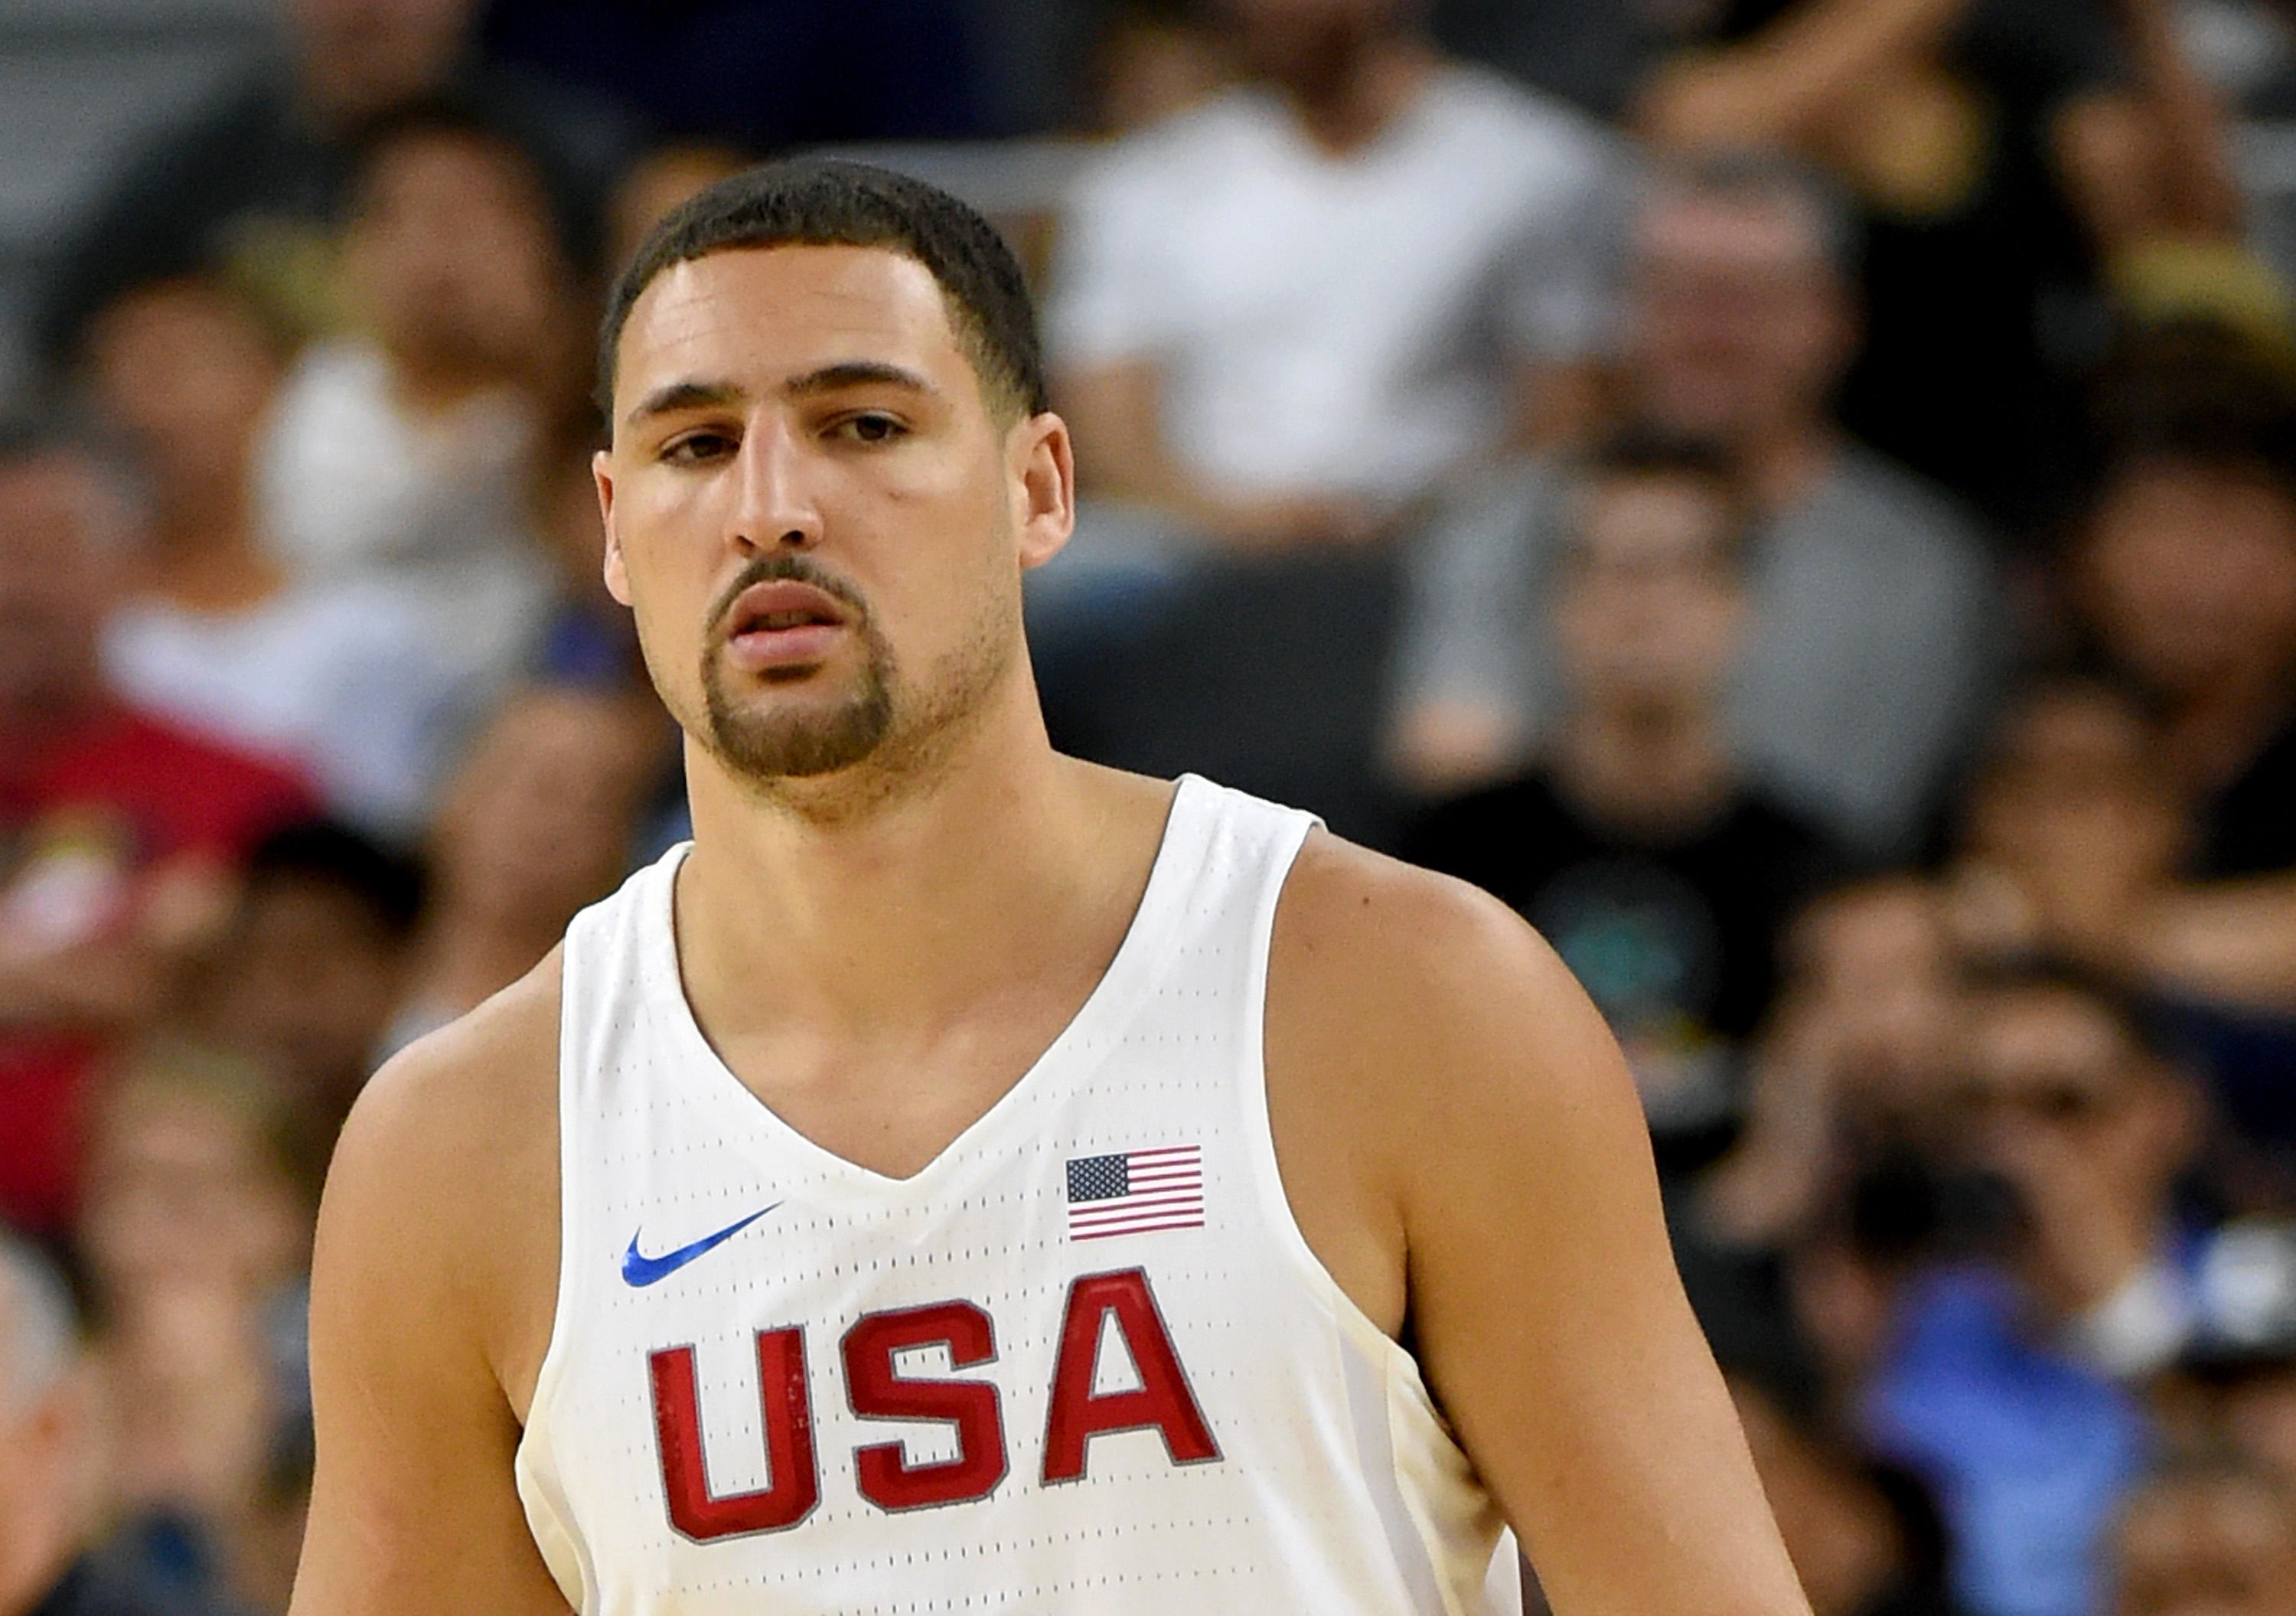 LAS VEGAS, NV - JULY 22: Klay Thompson #11 of the United States stands on the court during a USA Basketball showcase exhibition game against Argentina at T-Mobile Arena on July 22, 2016 in Las Vegas, Nevada. The United States won 111-74.   Ethan Miller/Getty Images/AFP